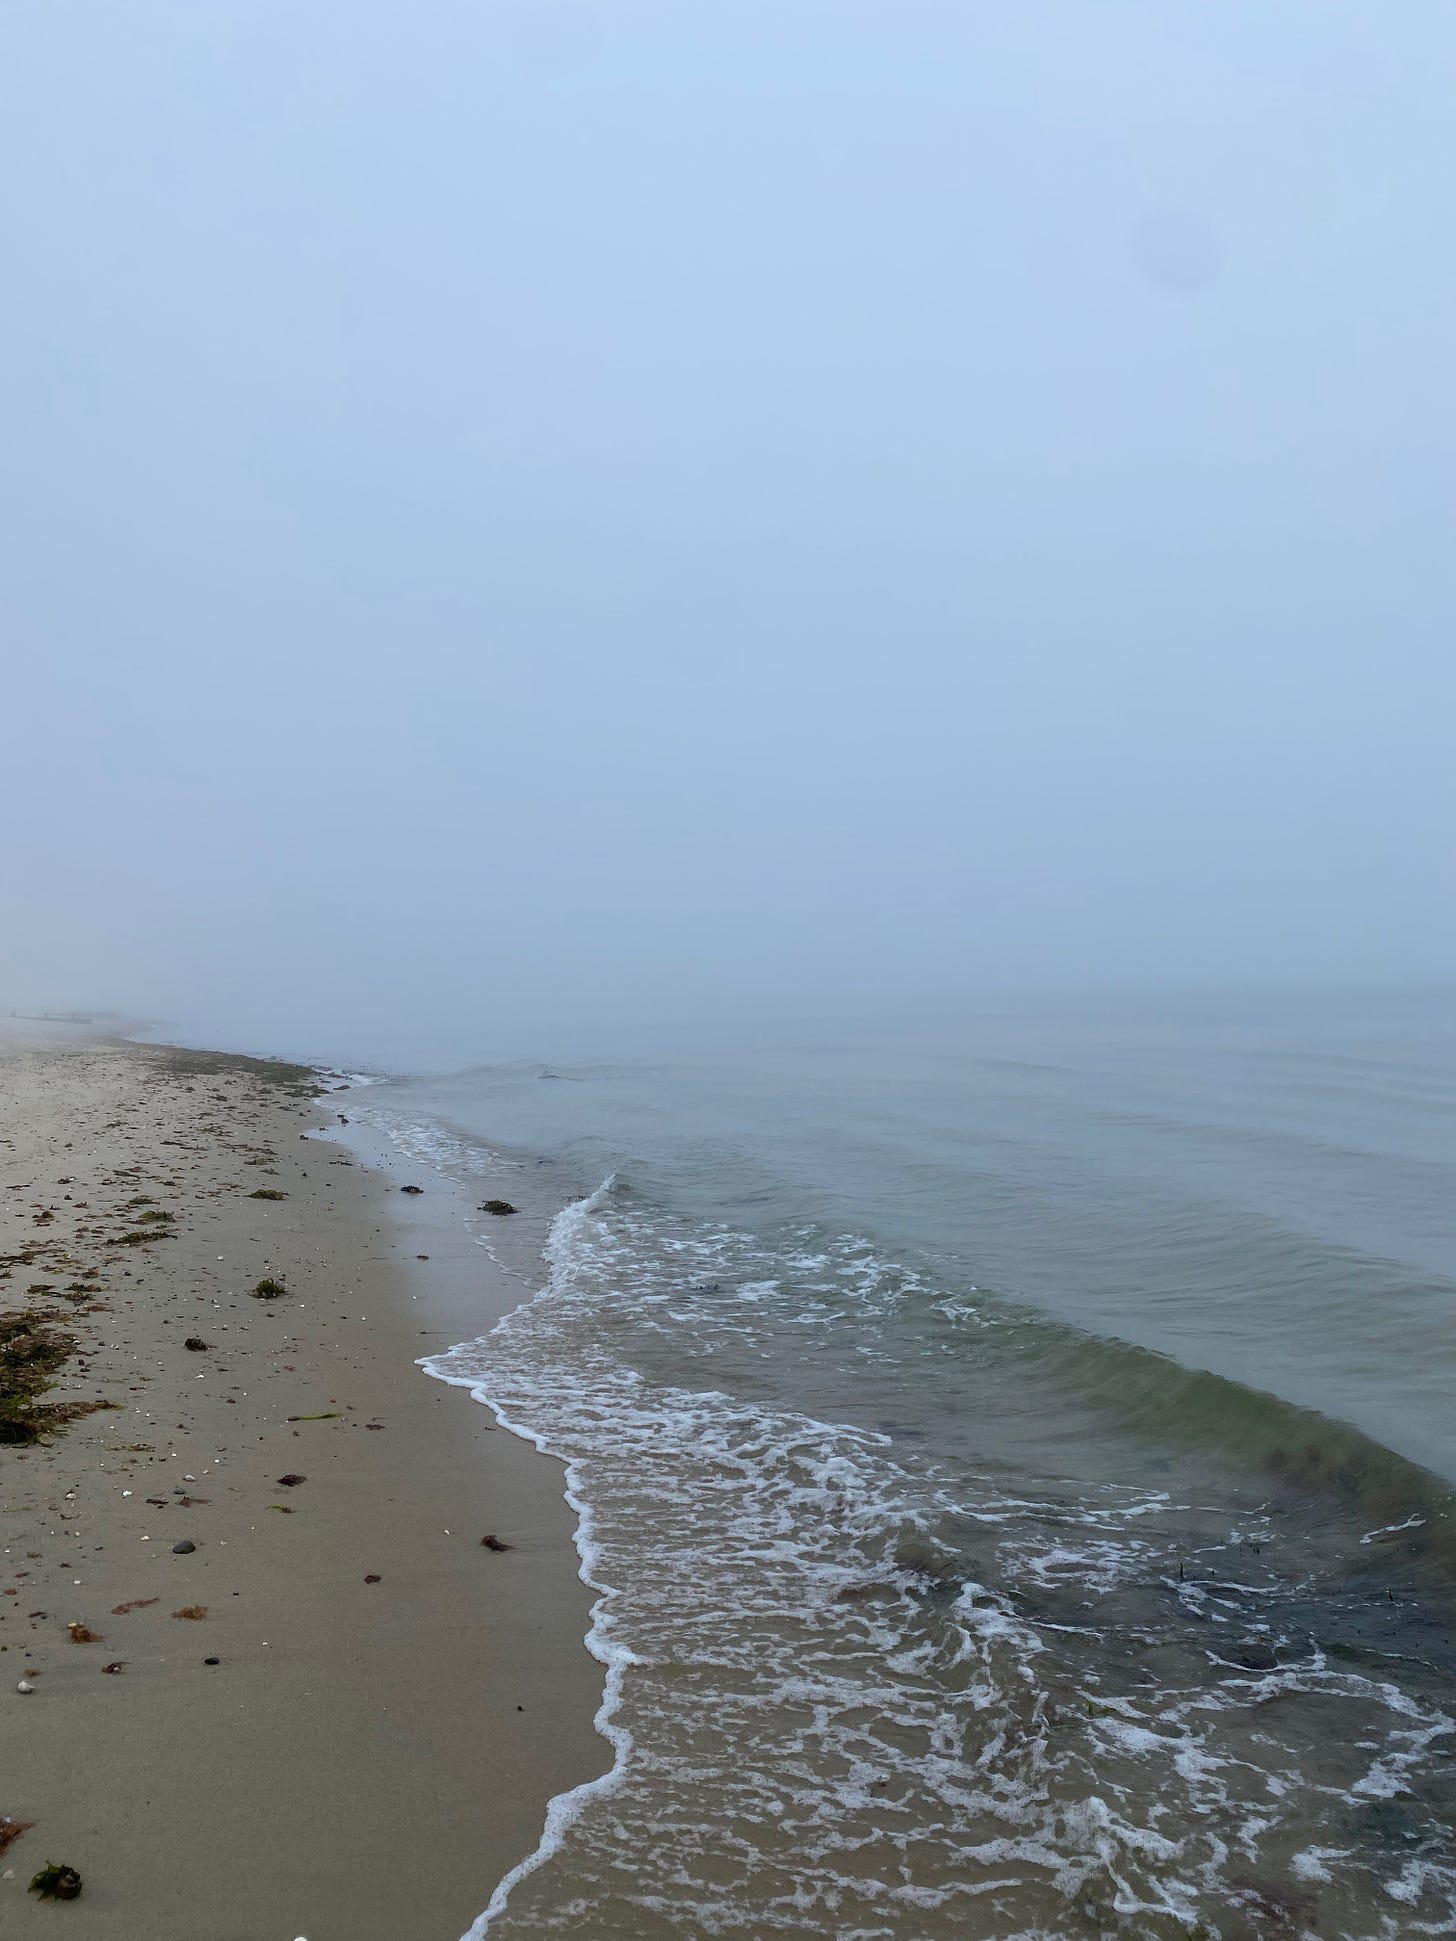 A view down the beach on a foggy day. A wave is breaking on the shore; the horizon is obscured by fog. 